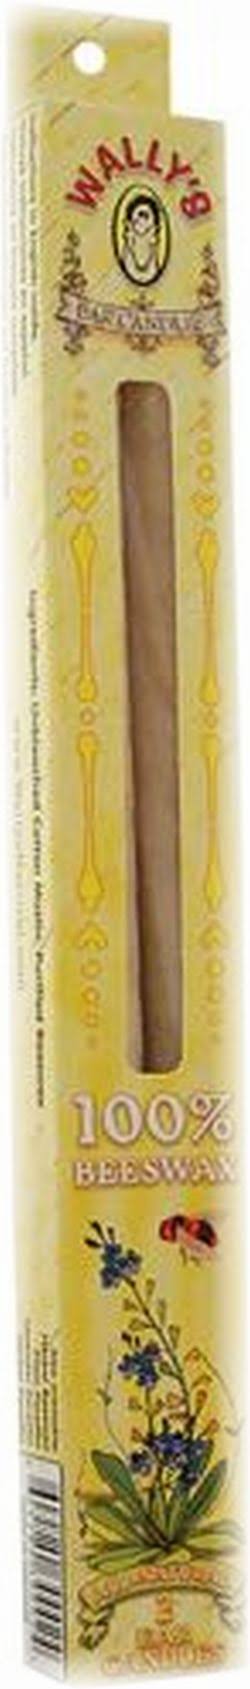 Wally's Natural Unscented Beeswax Ear Candles - 2ct